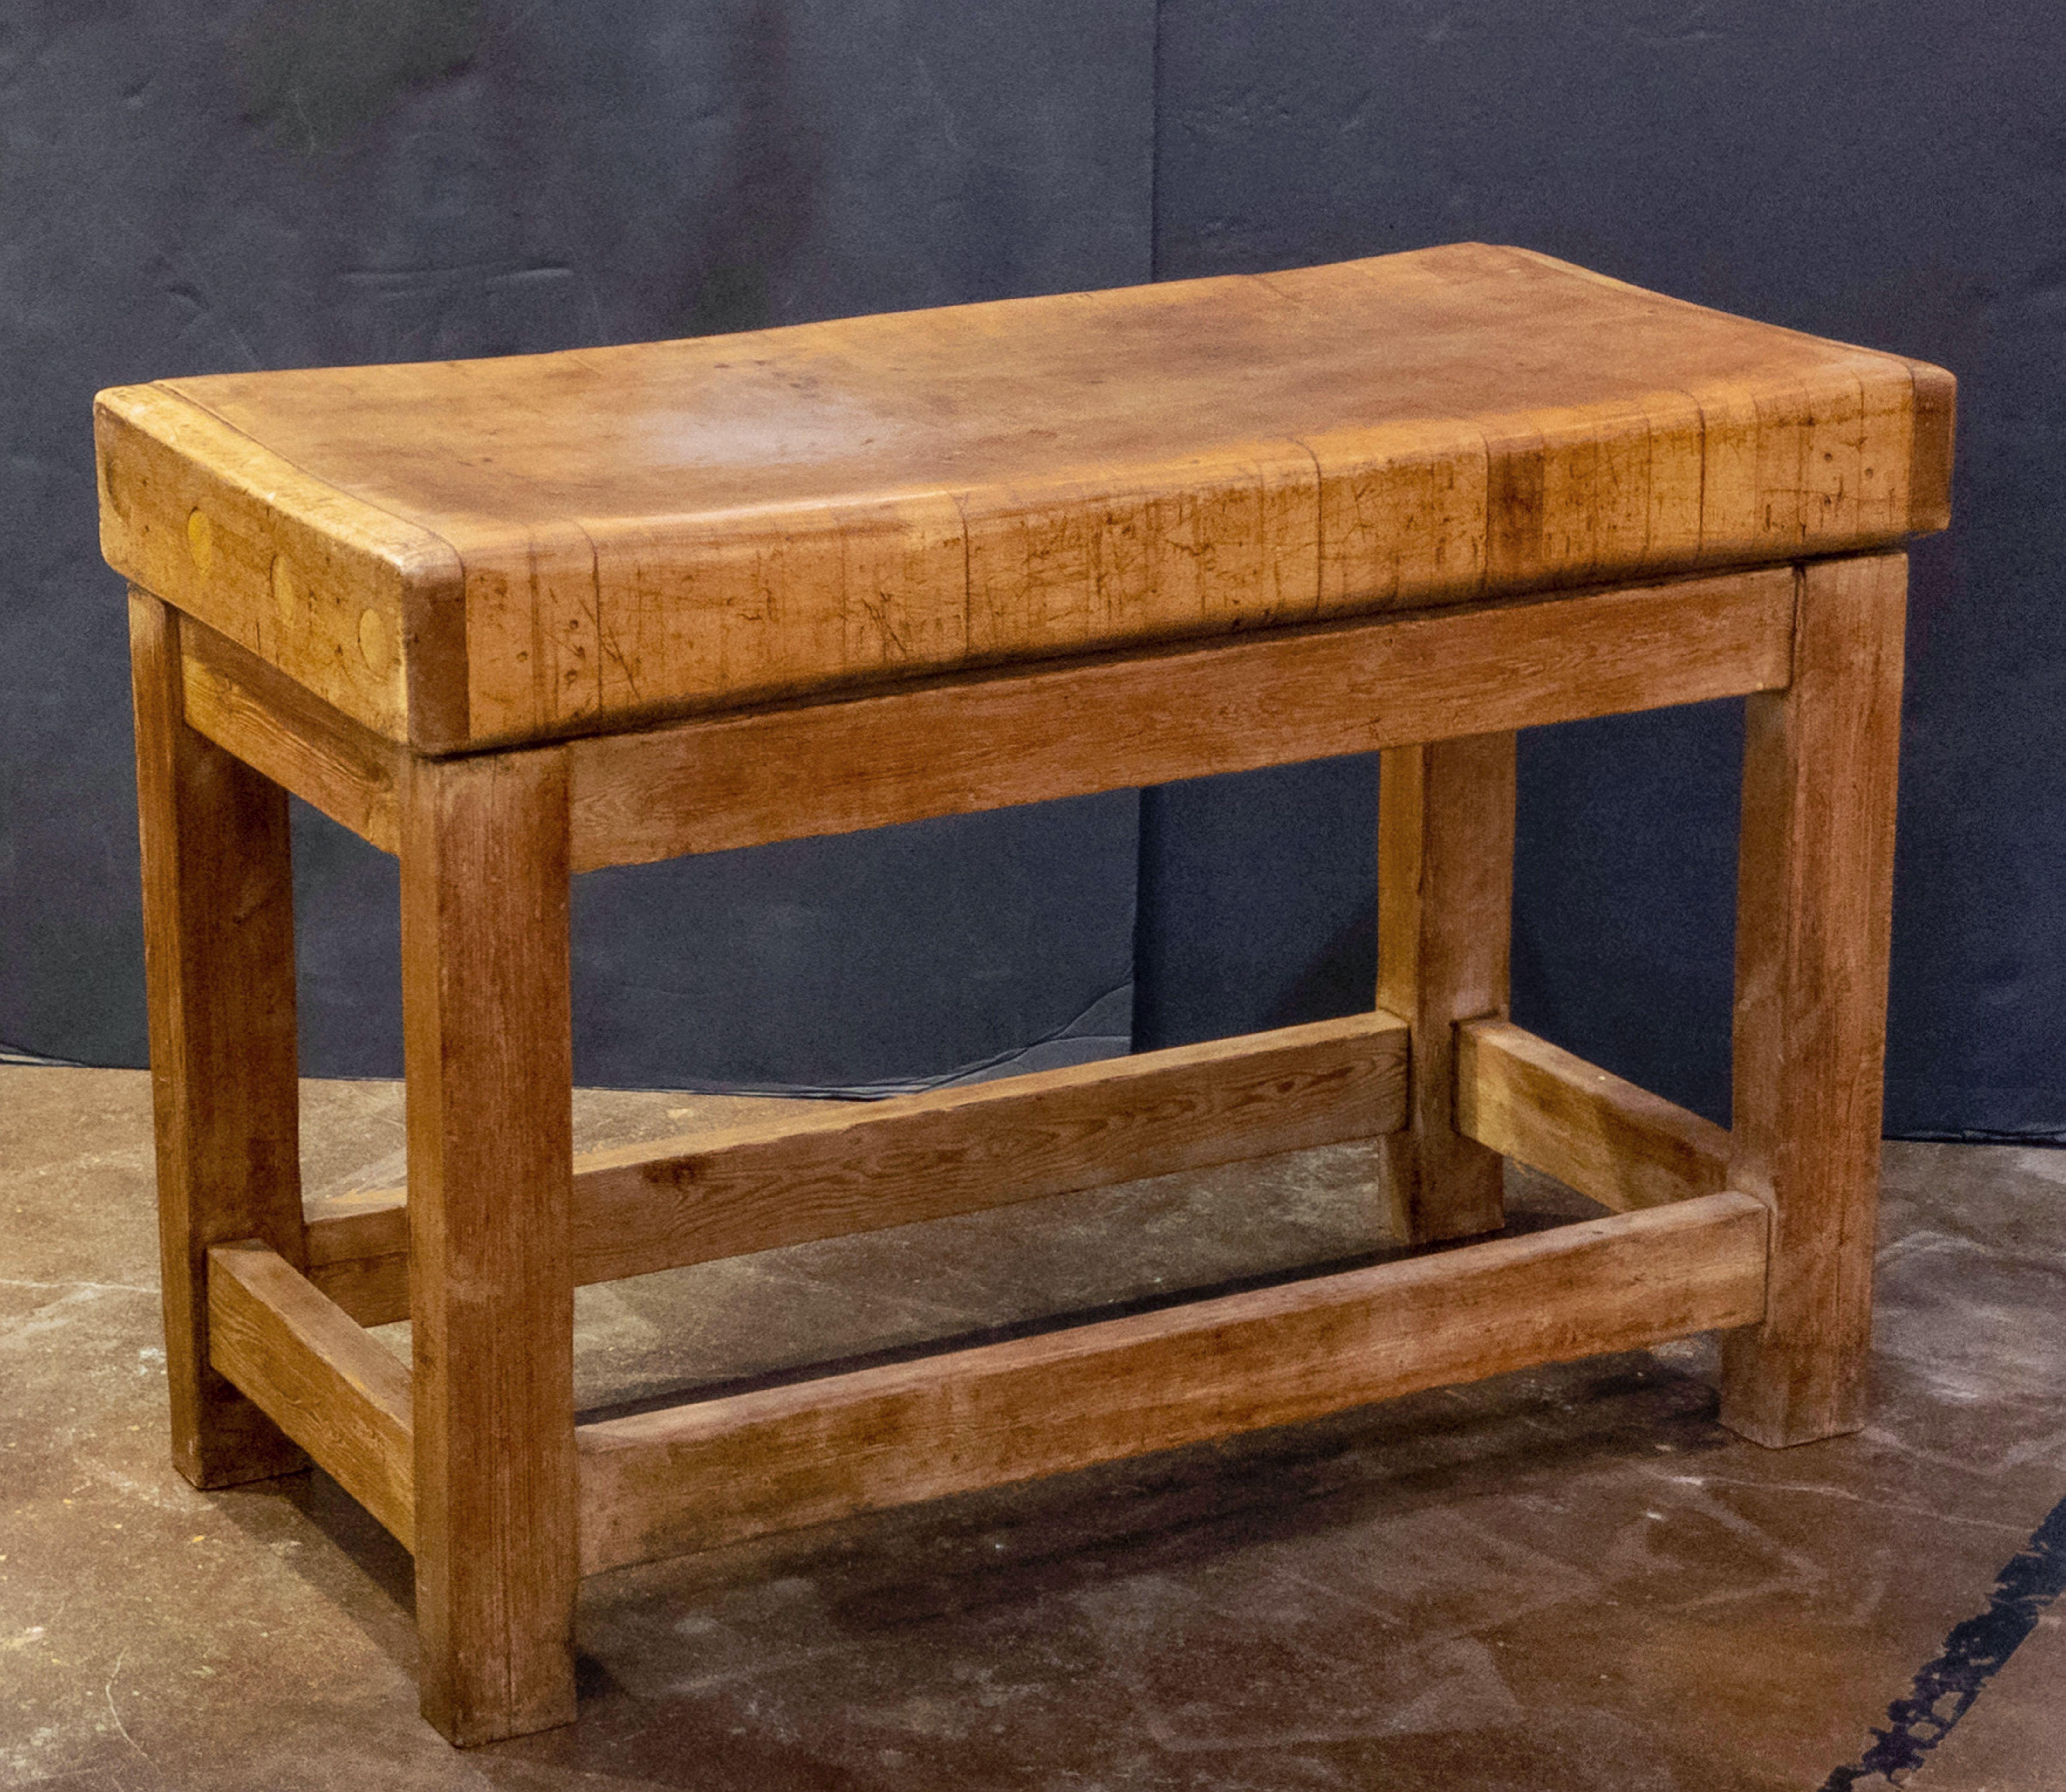 A handsome large French butcher's chopping block table, featuring a large, rectangular block or slab of wood set upon a bottom tier four-legged support stand. Ships in two pieces.

Makes a great kitchen island or serving console.